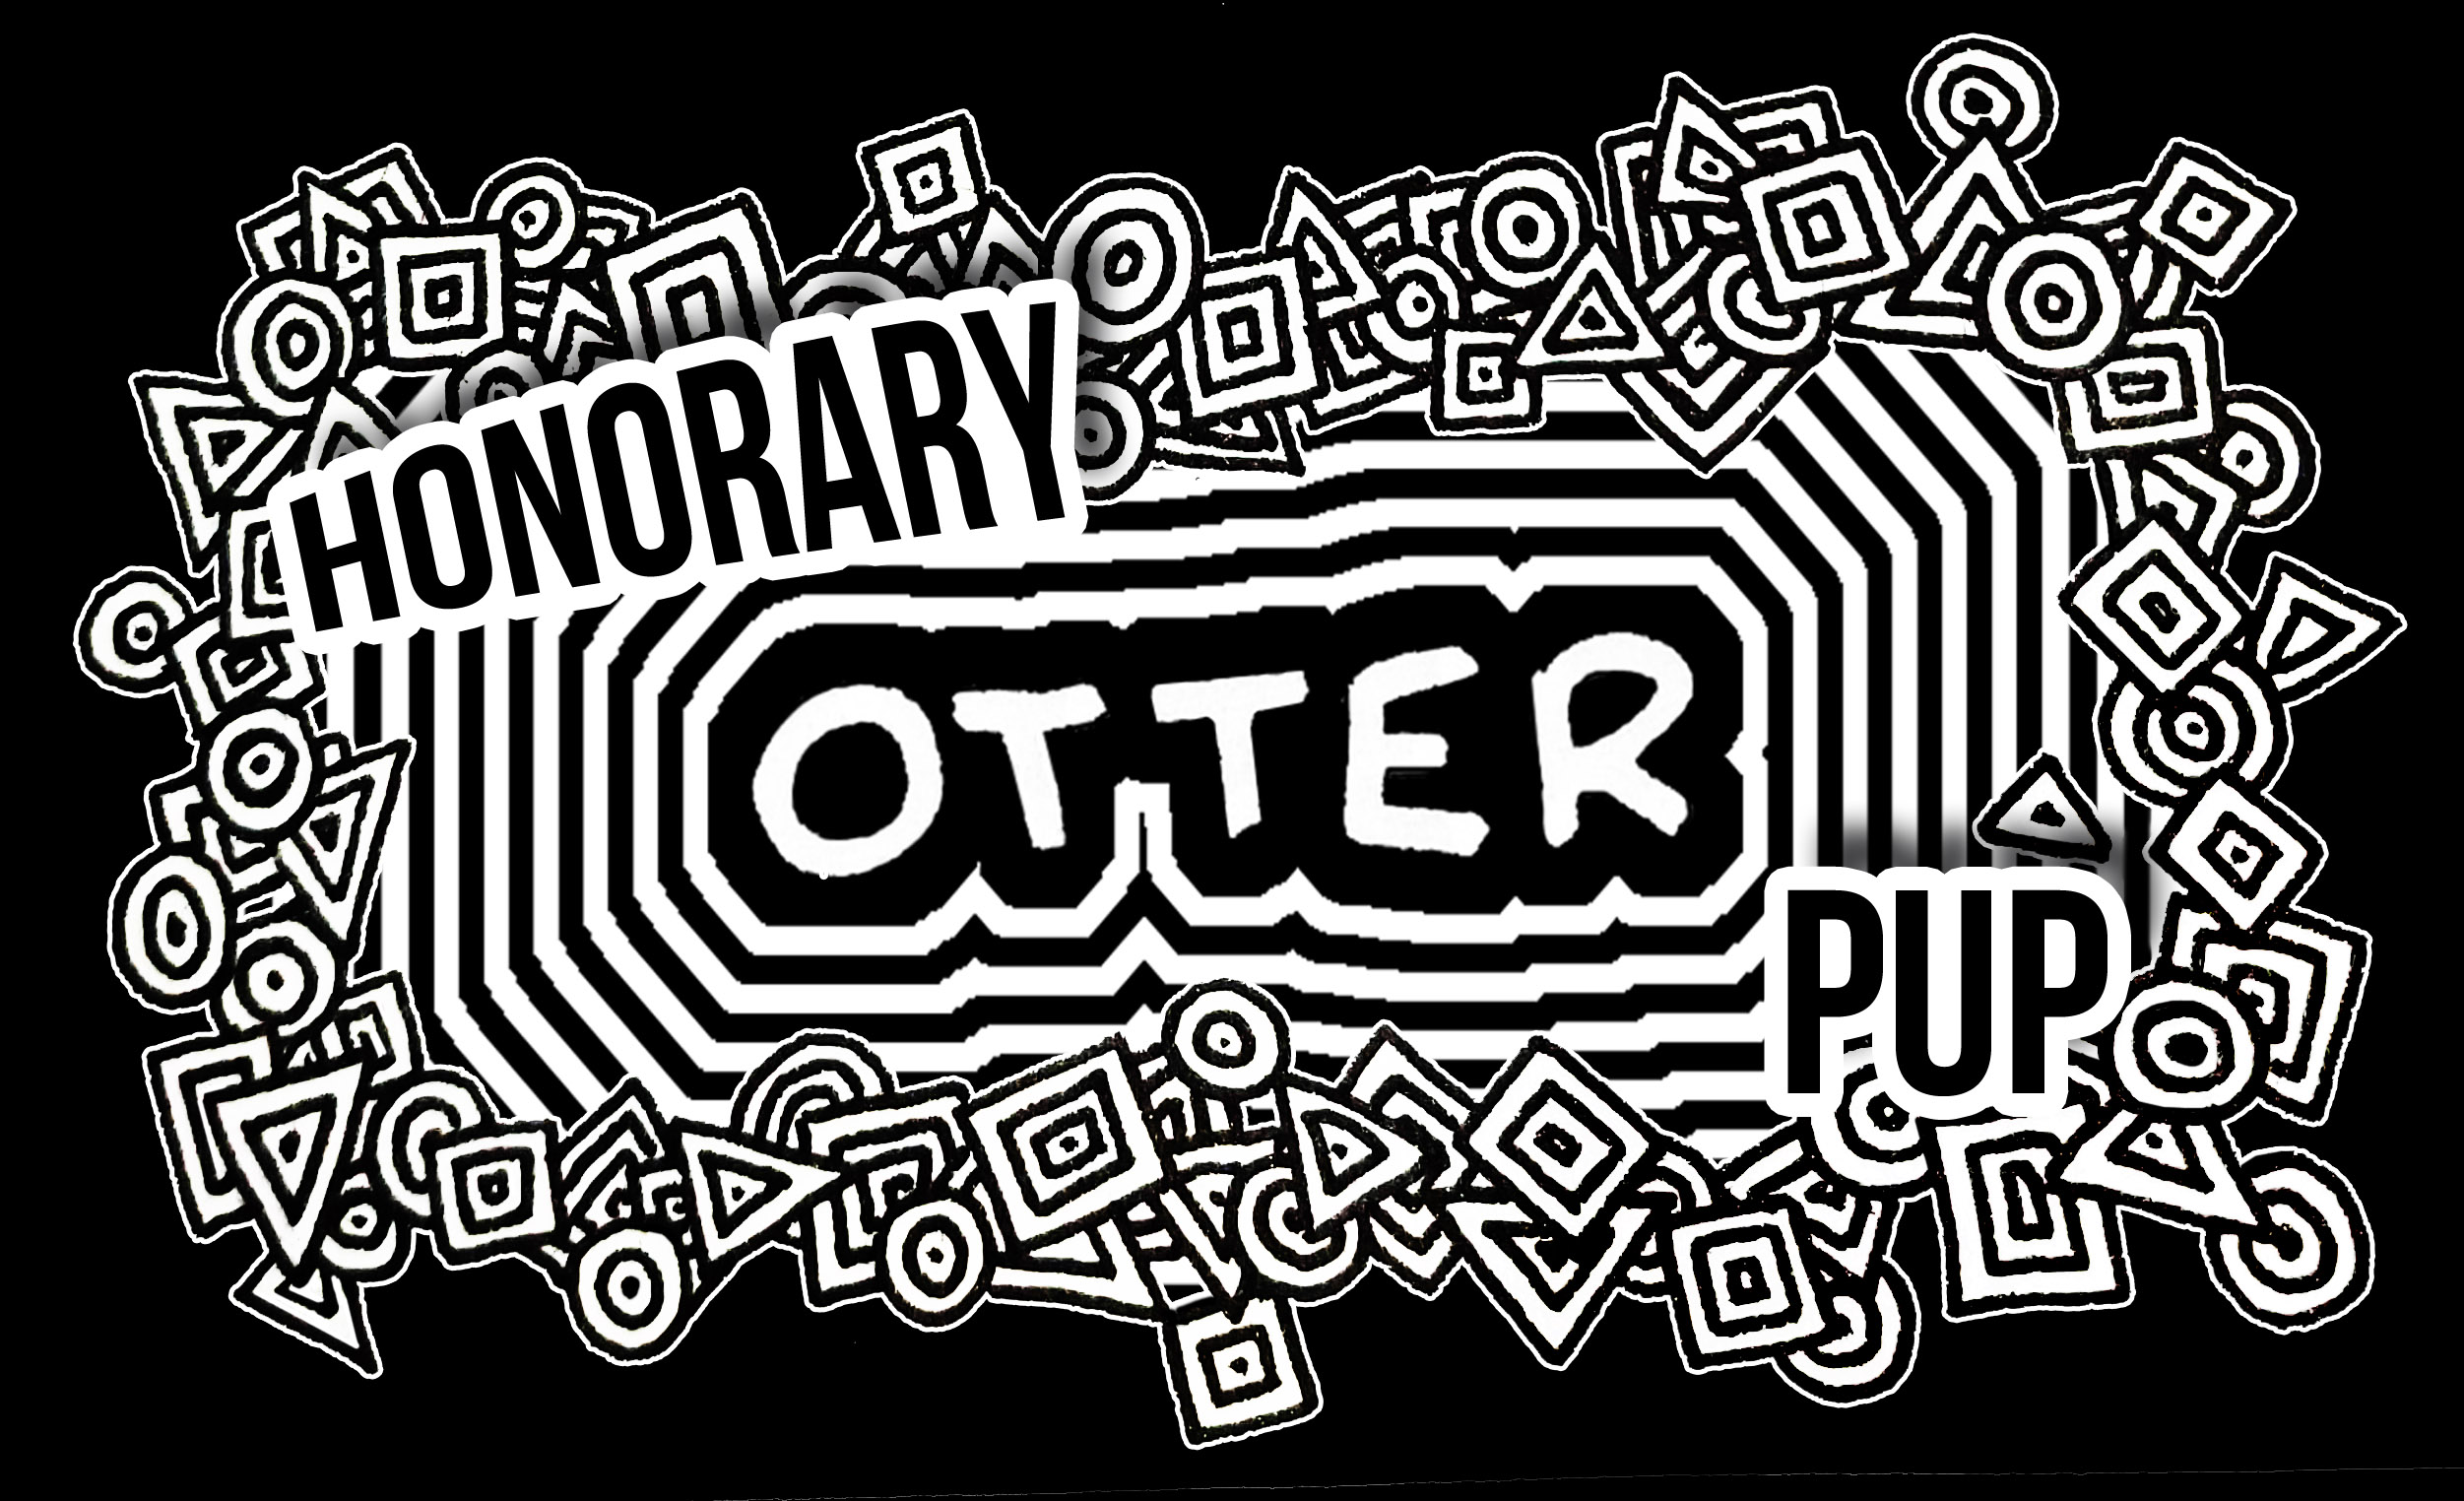 The Honorary OTTER pup sticker